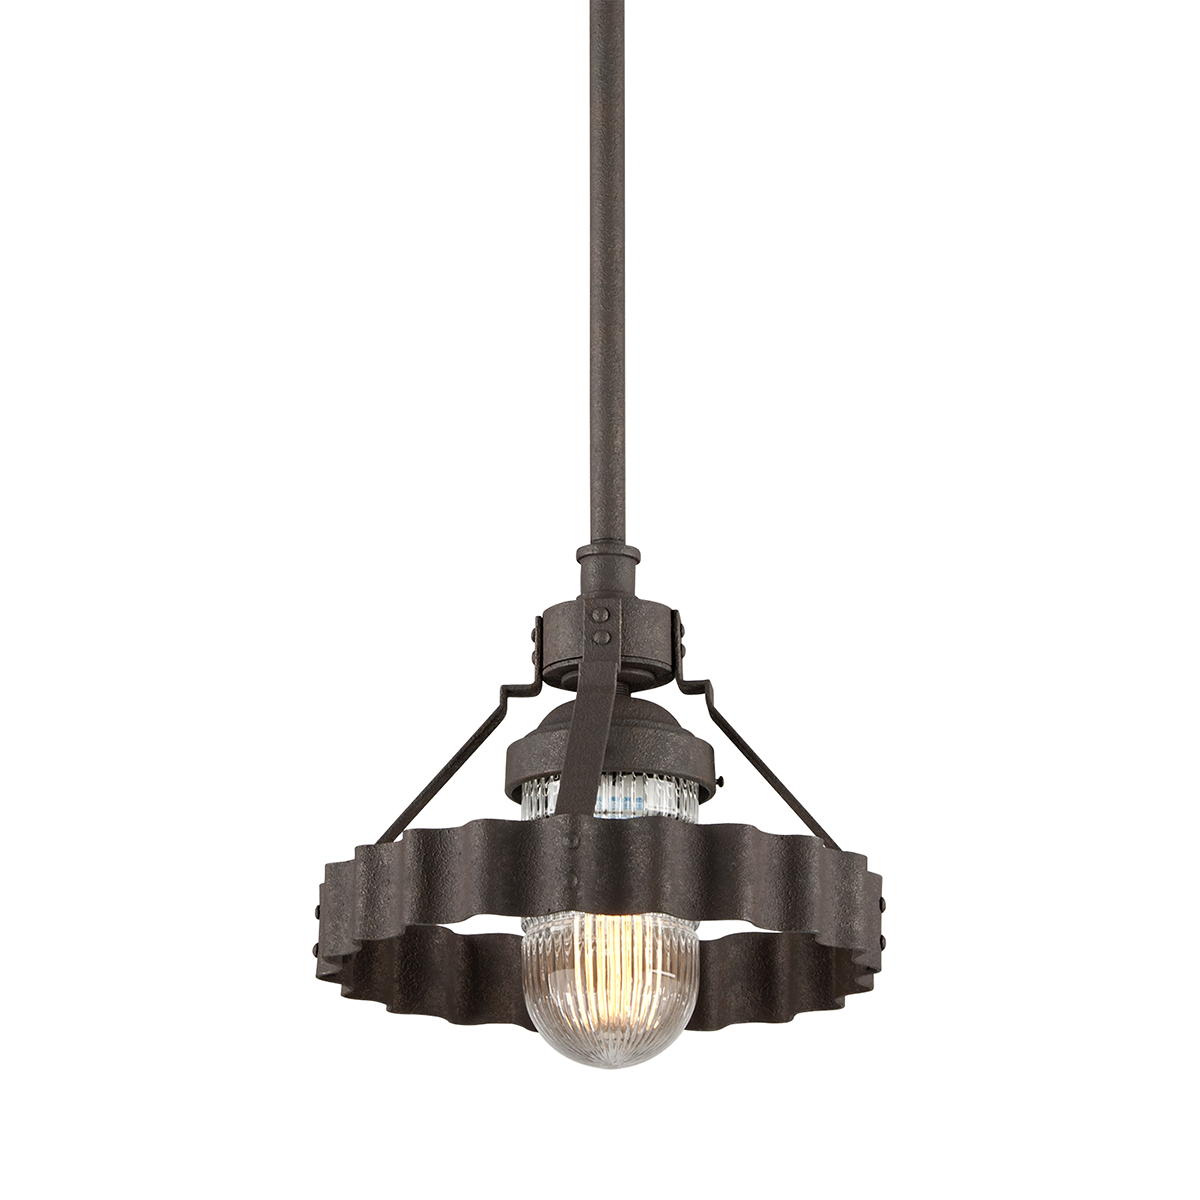 Troy Lighting CANARY WHARF 1LT PENDANT SMALL F4243 Outdoor Light Fixture l Hanging Troy Lighting BURNT SIENNA  